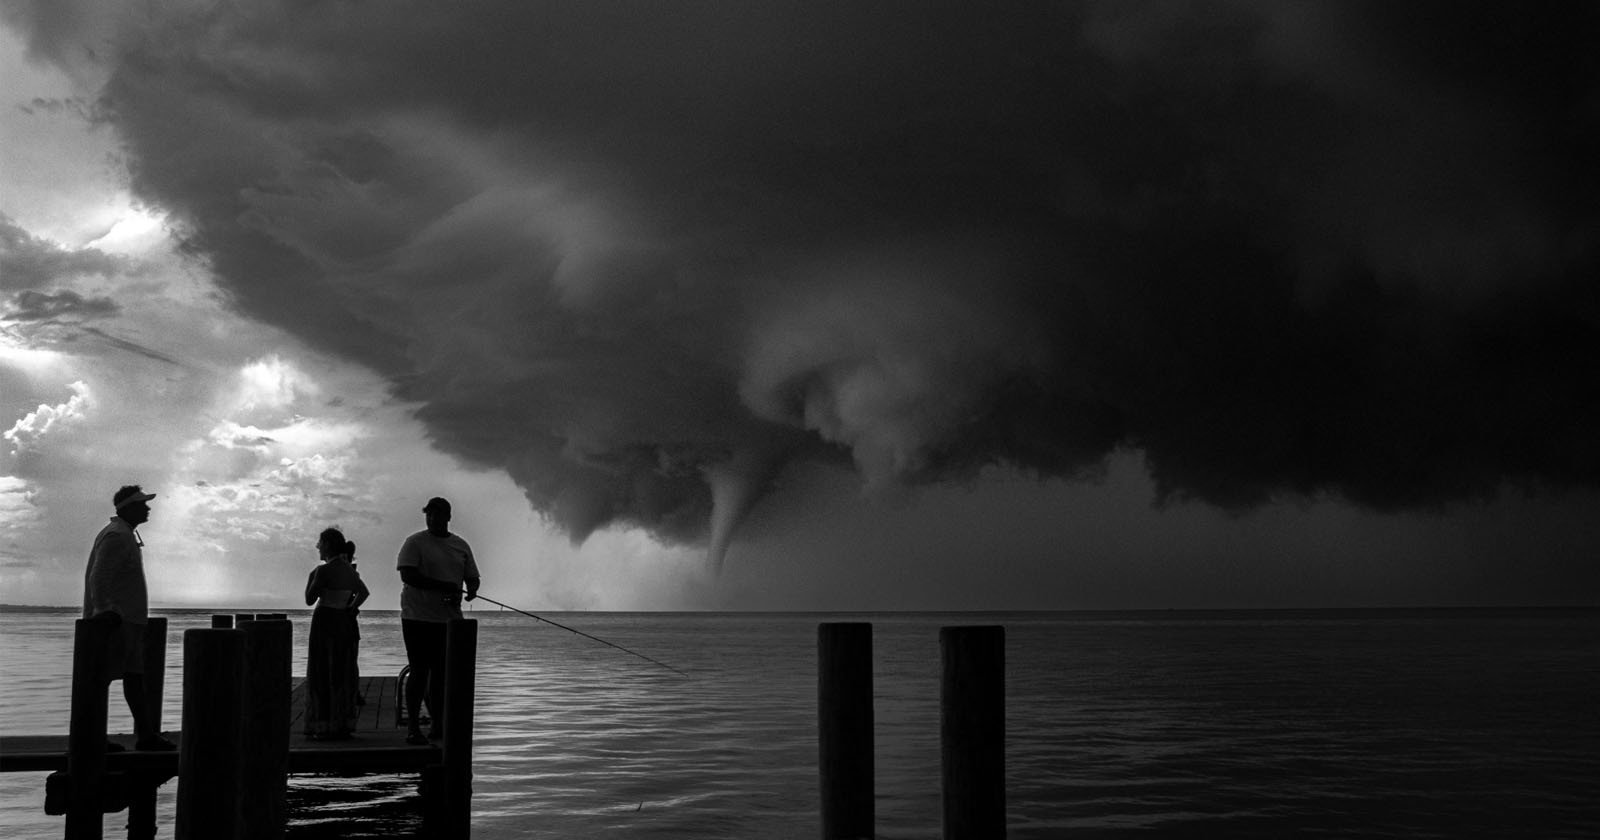  photographer waits years capture rare waterspout 